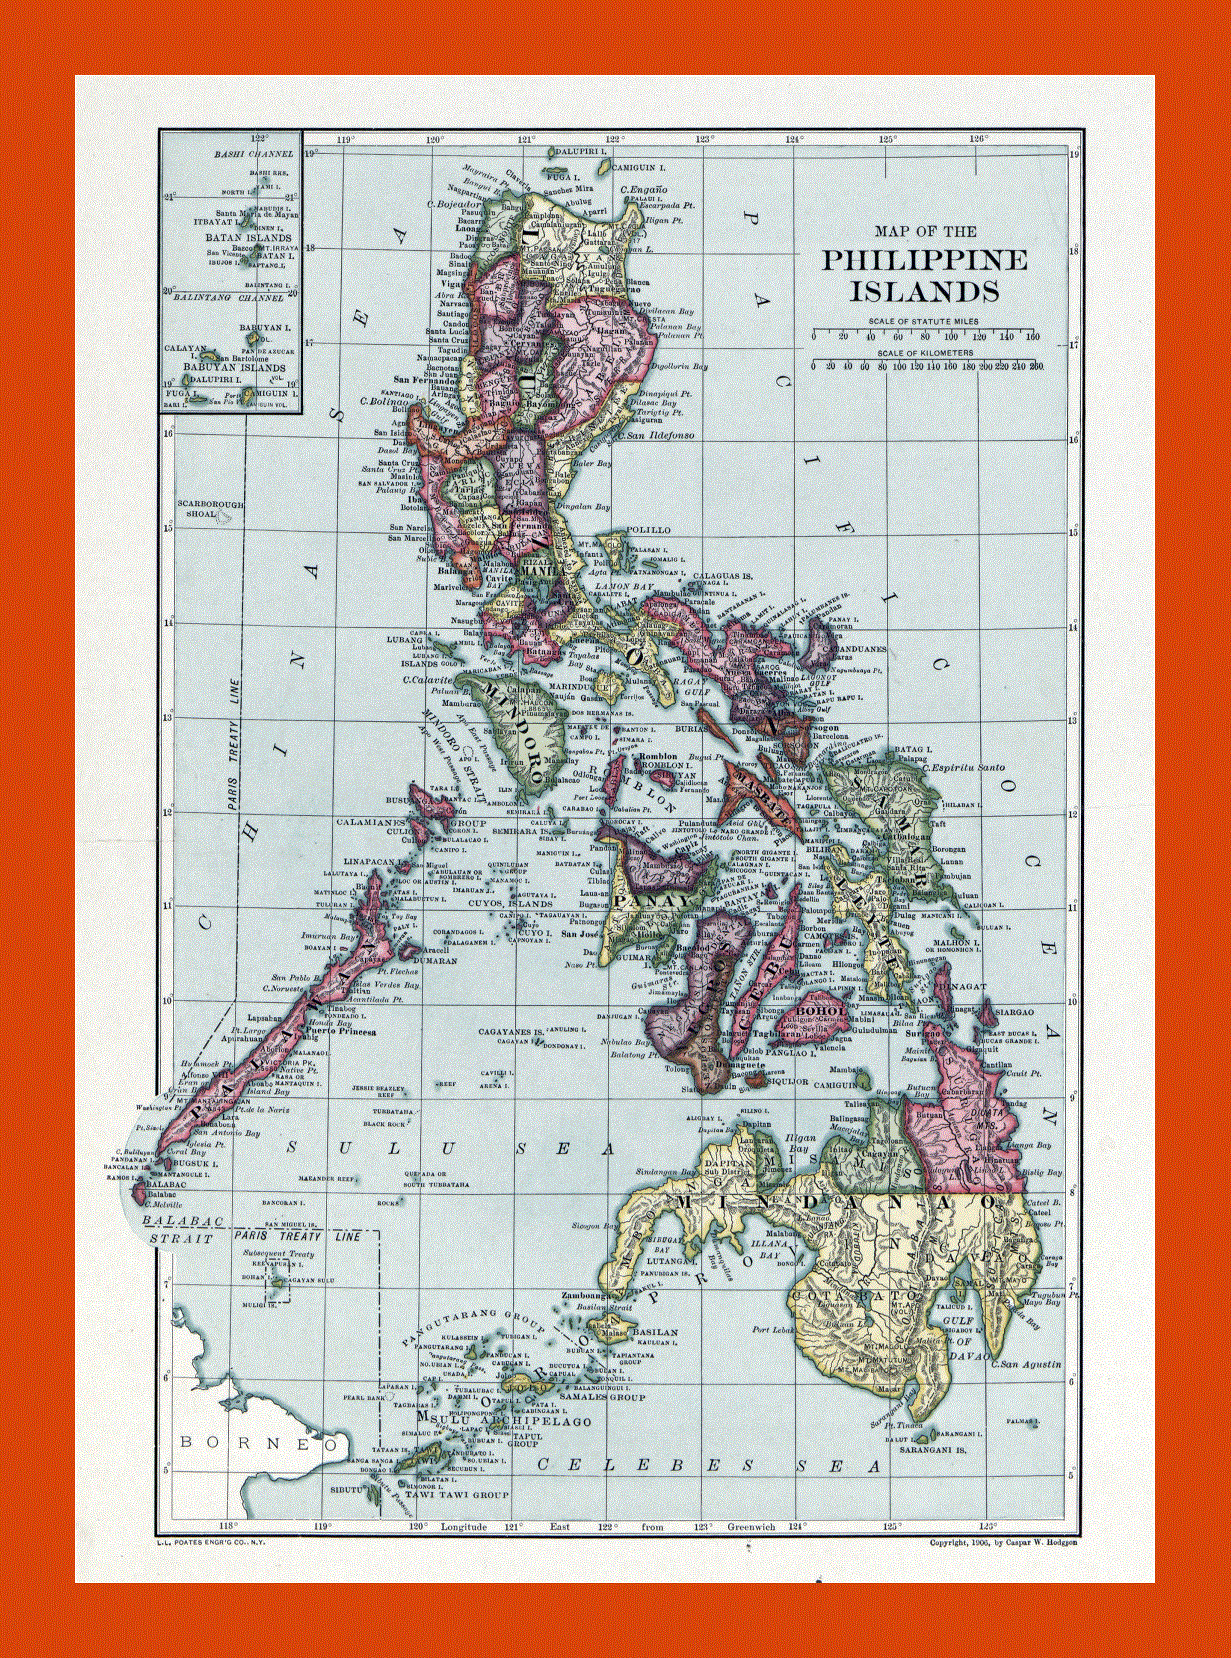 Old map of the Philippine islands - 1906